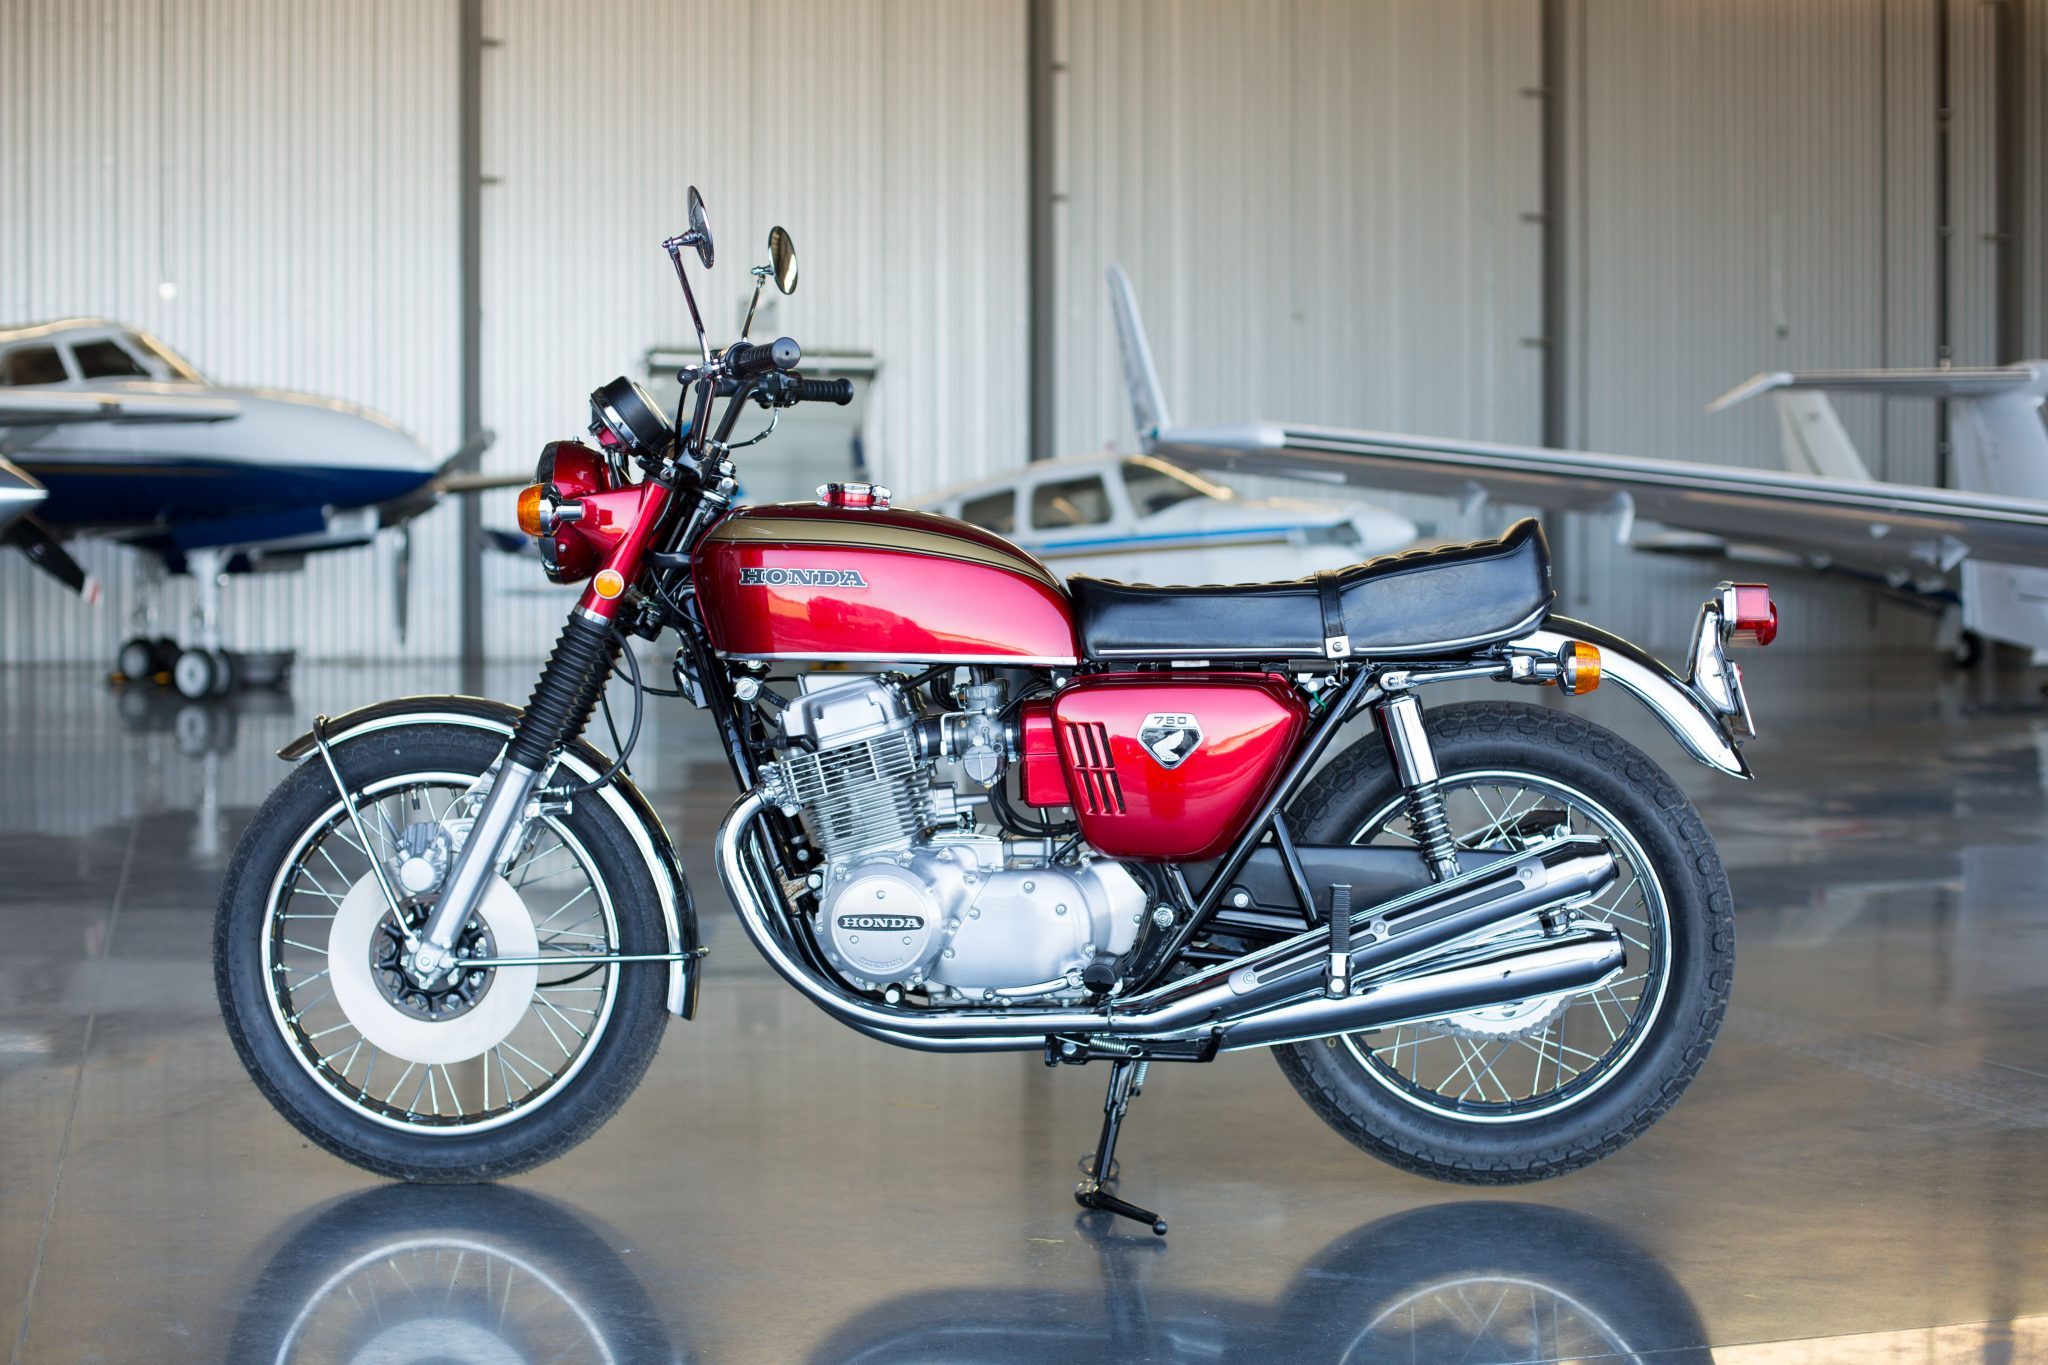 Restored 1970 Honda Cb750 Looks Absolutely Spotless Is Offered At No Reserve Autoevolution 3185